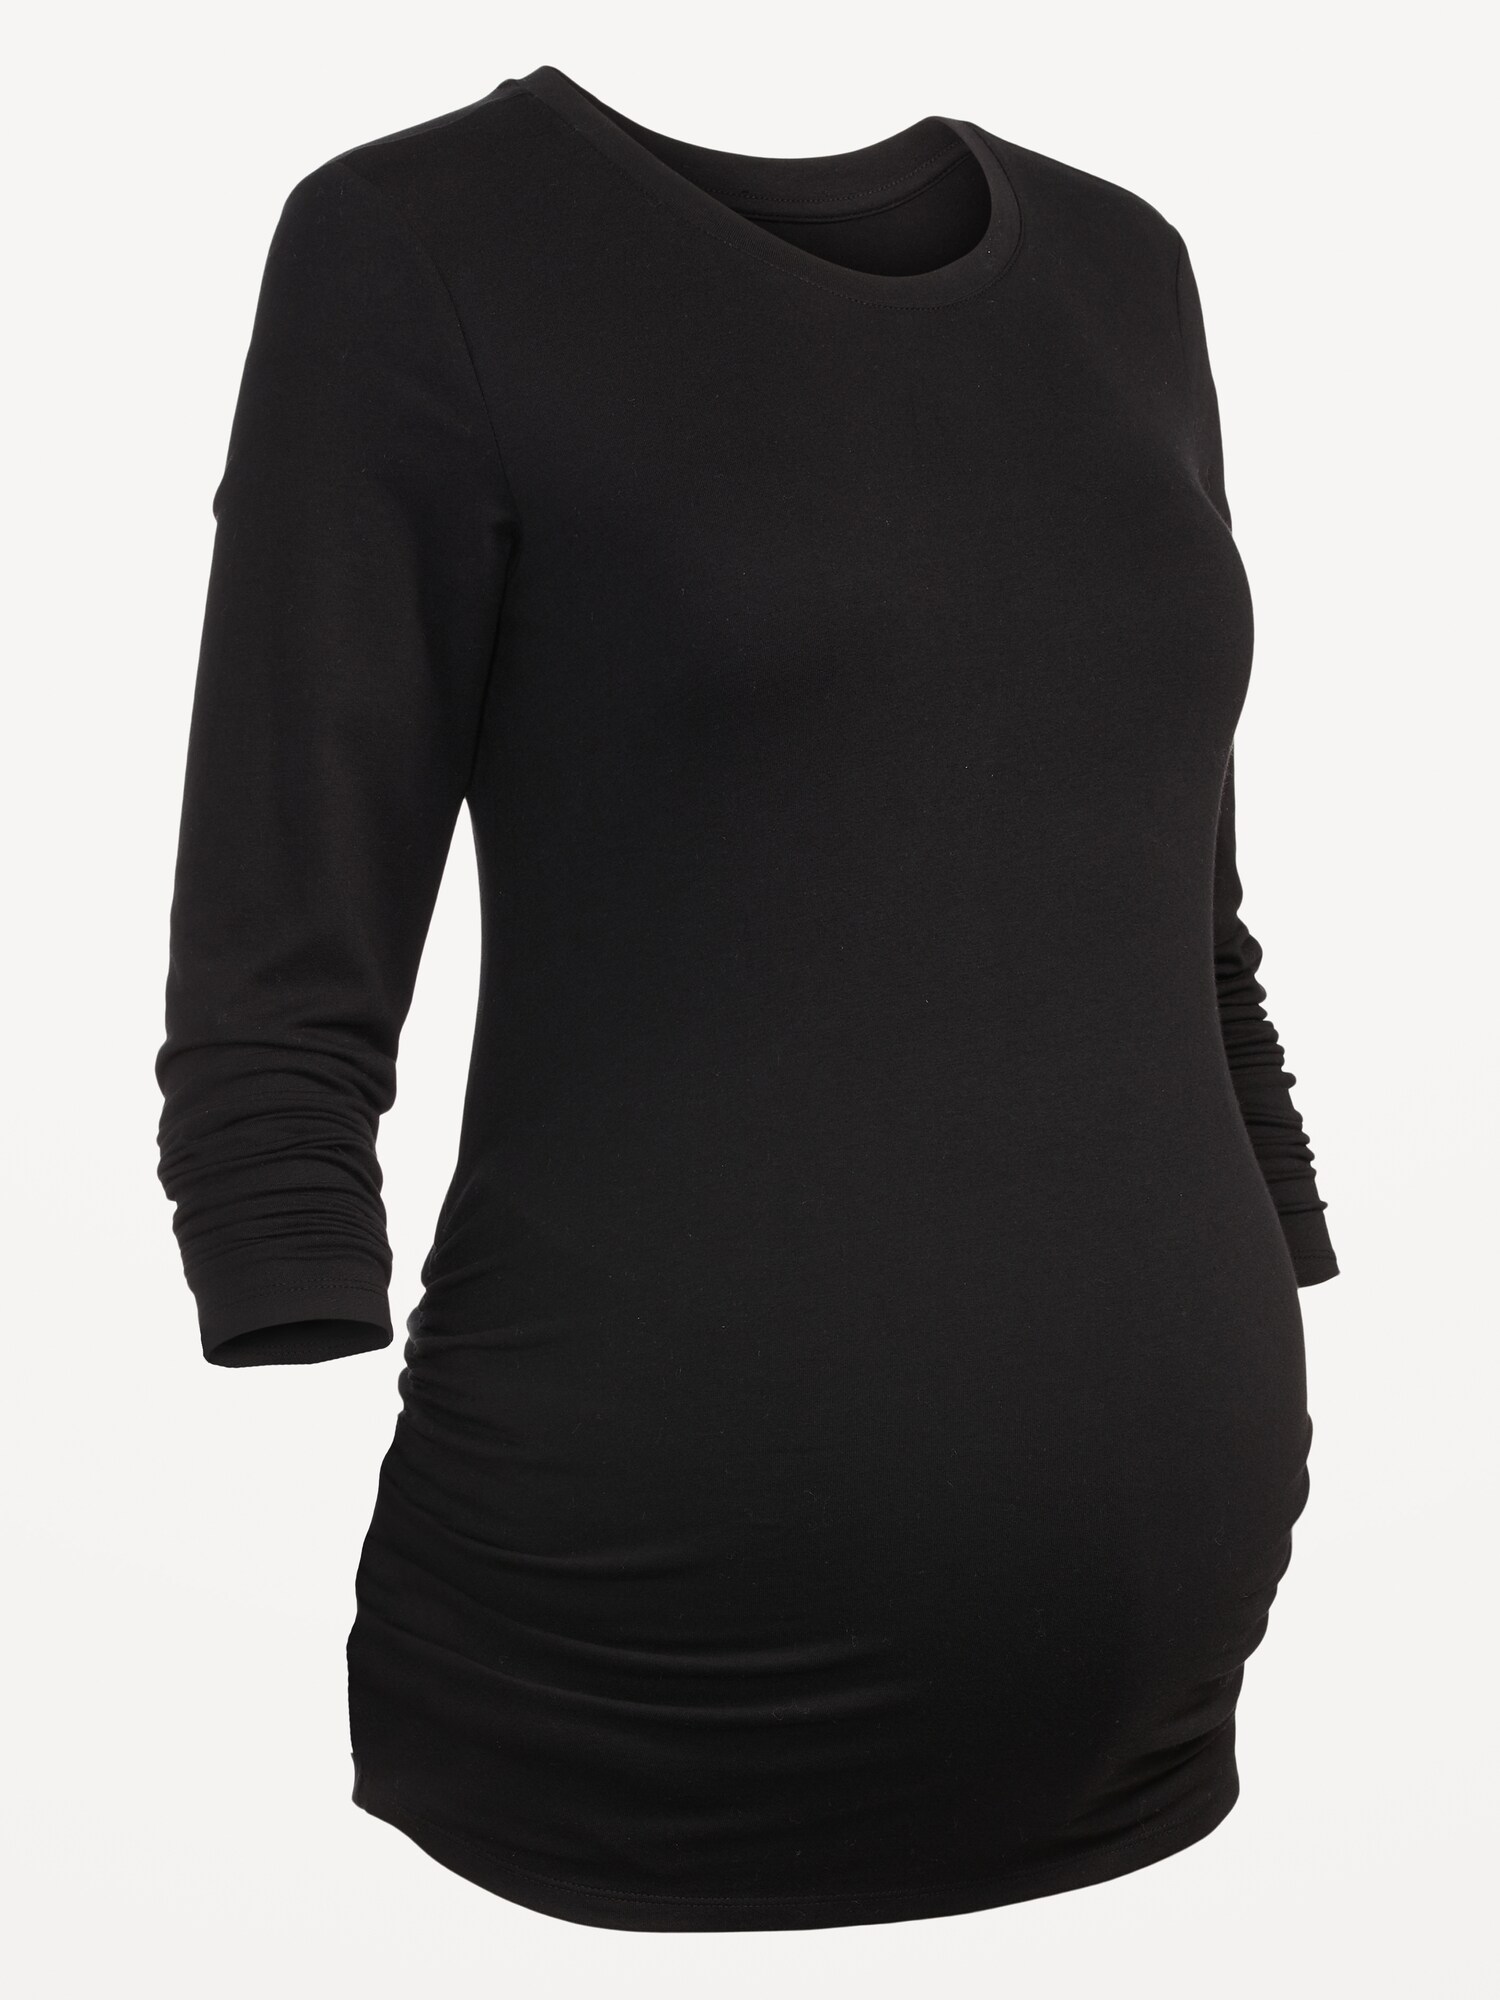 Liu & Qu Women's Maternity Ruched Tunic Tops Mama Clothes Long Sleeve Scoop Neck Pregnancy T-Shirt 